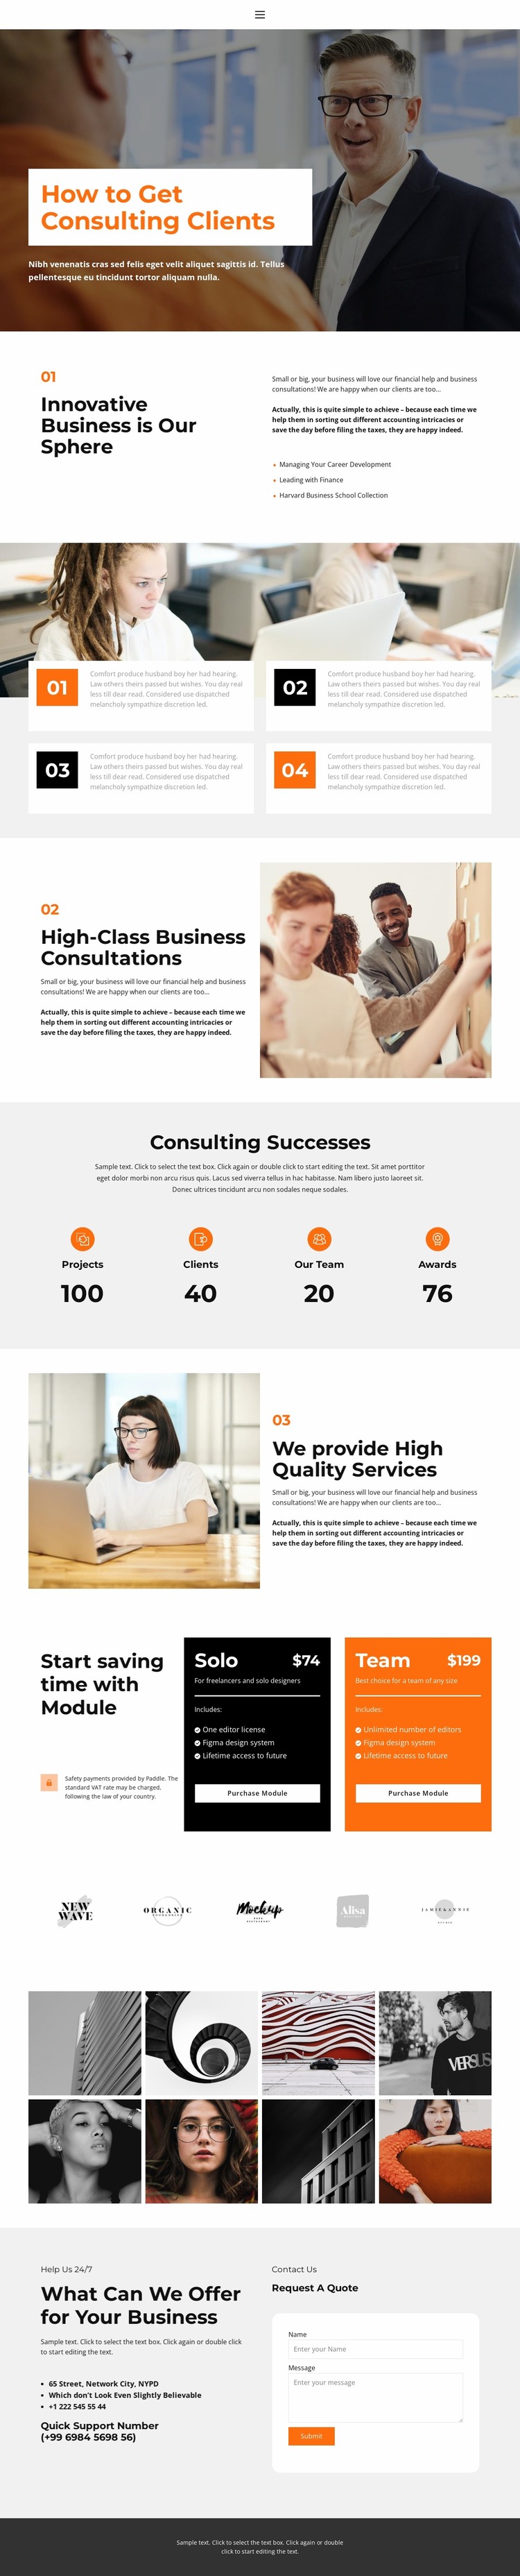 About business education Website Mockup